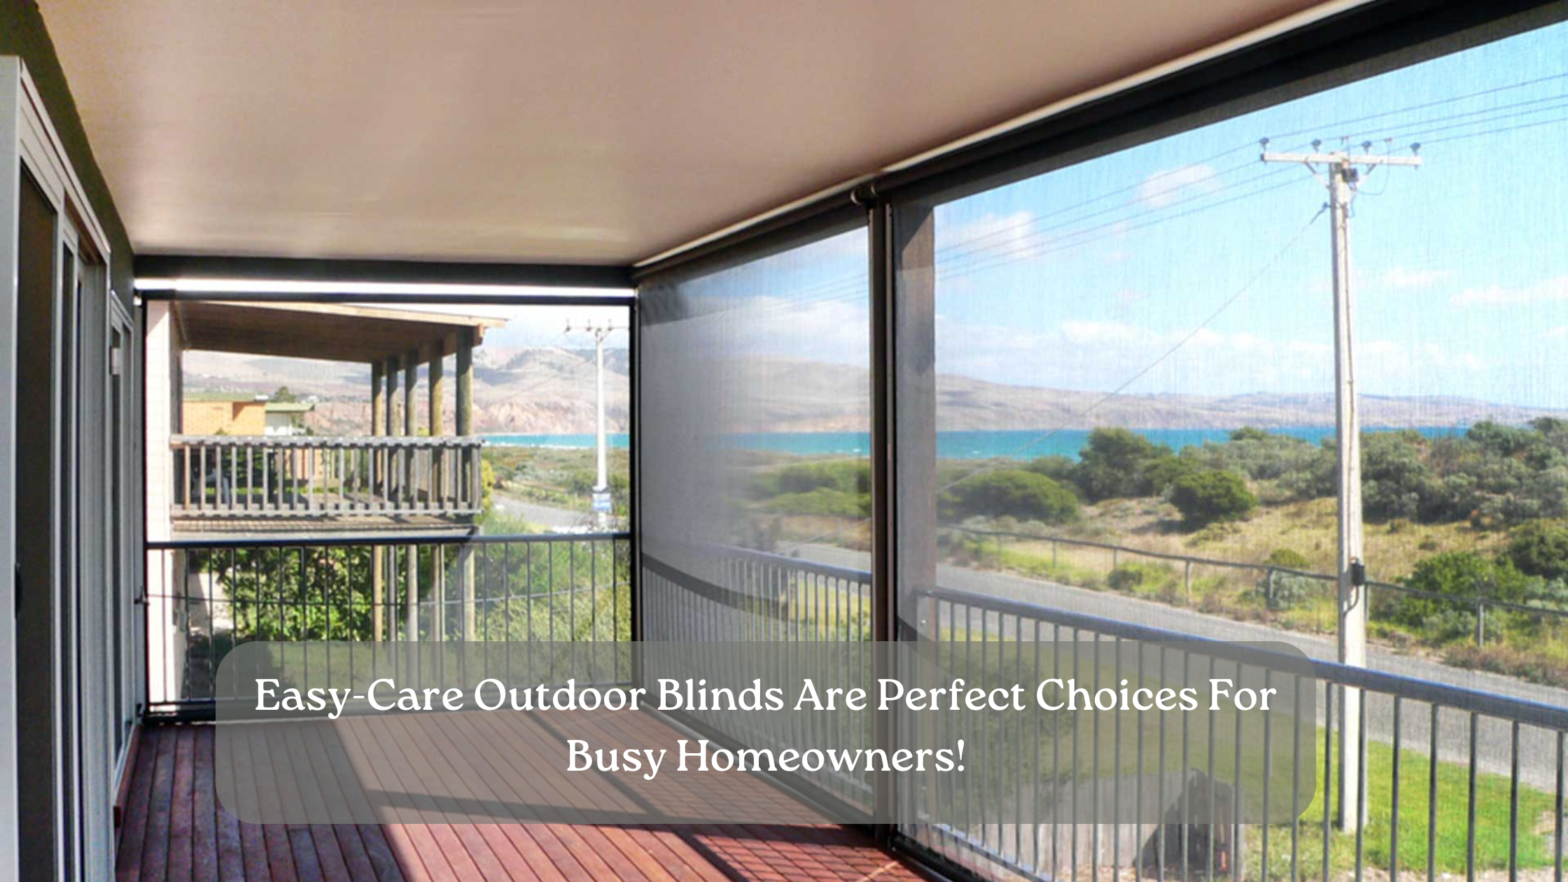 Why Easy Care Outdoor Blinds Are The Best For Busy Homeowners